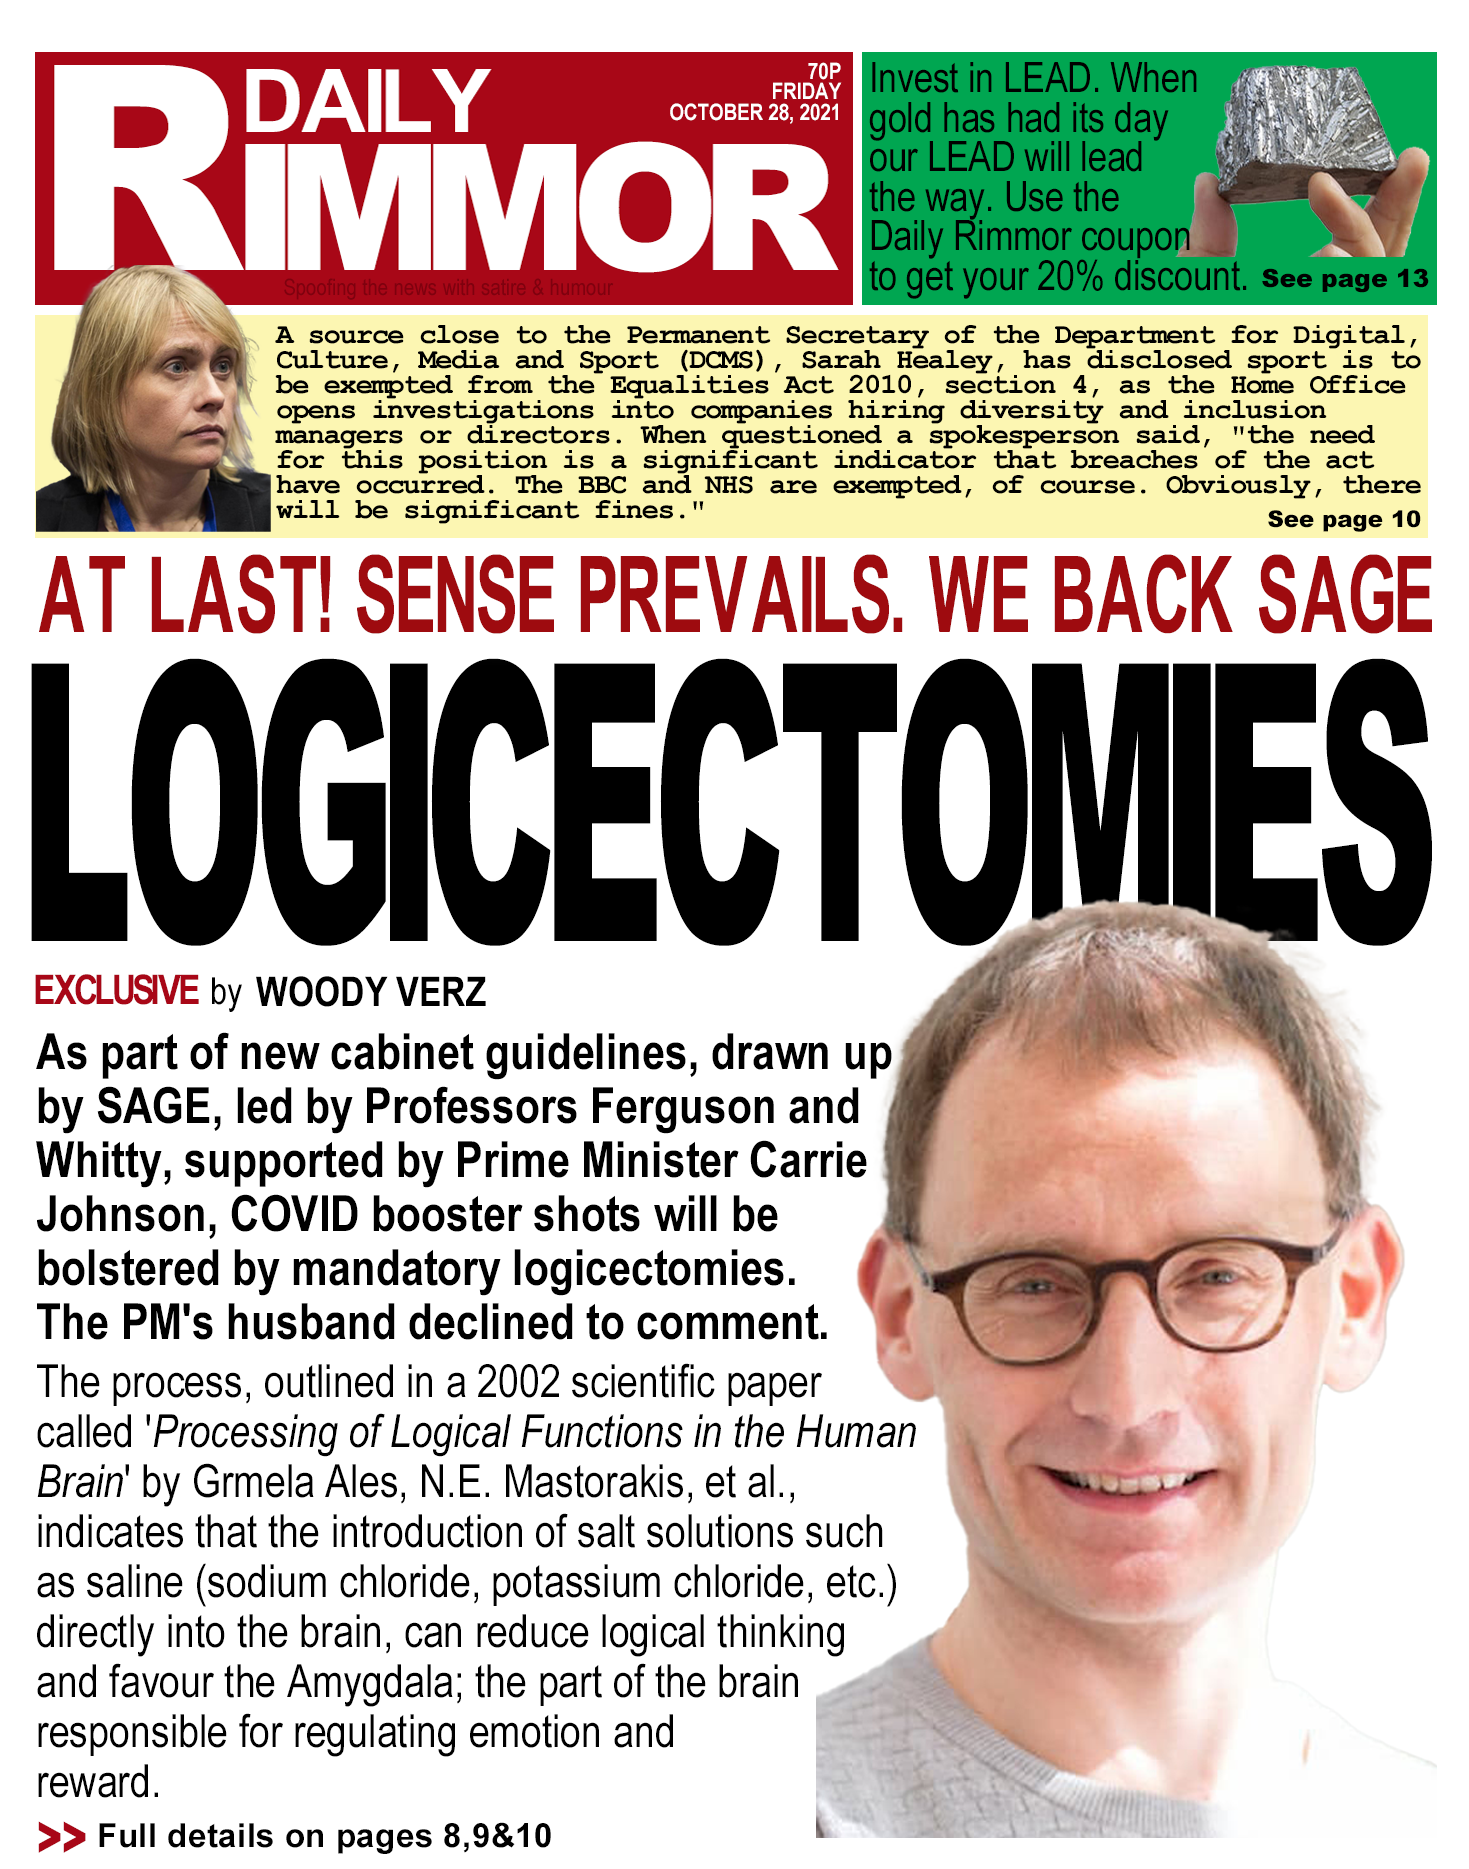 Daily Rimmor front page. COVID-19, Thursday 28 October